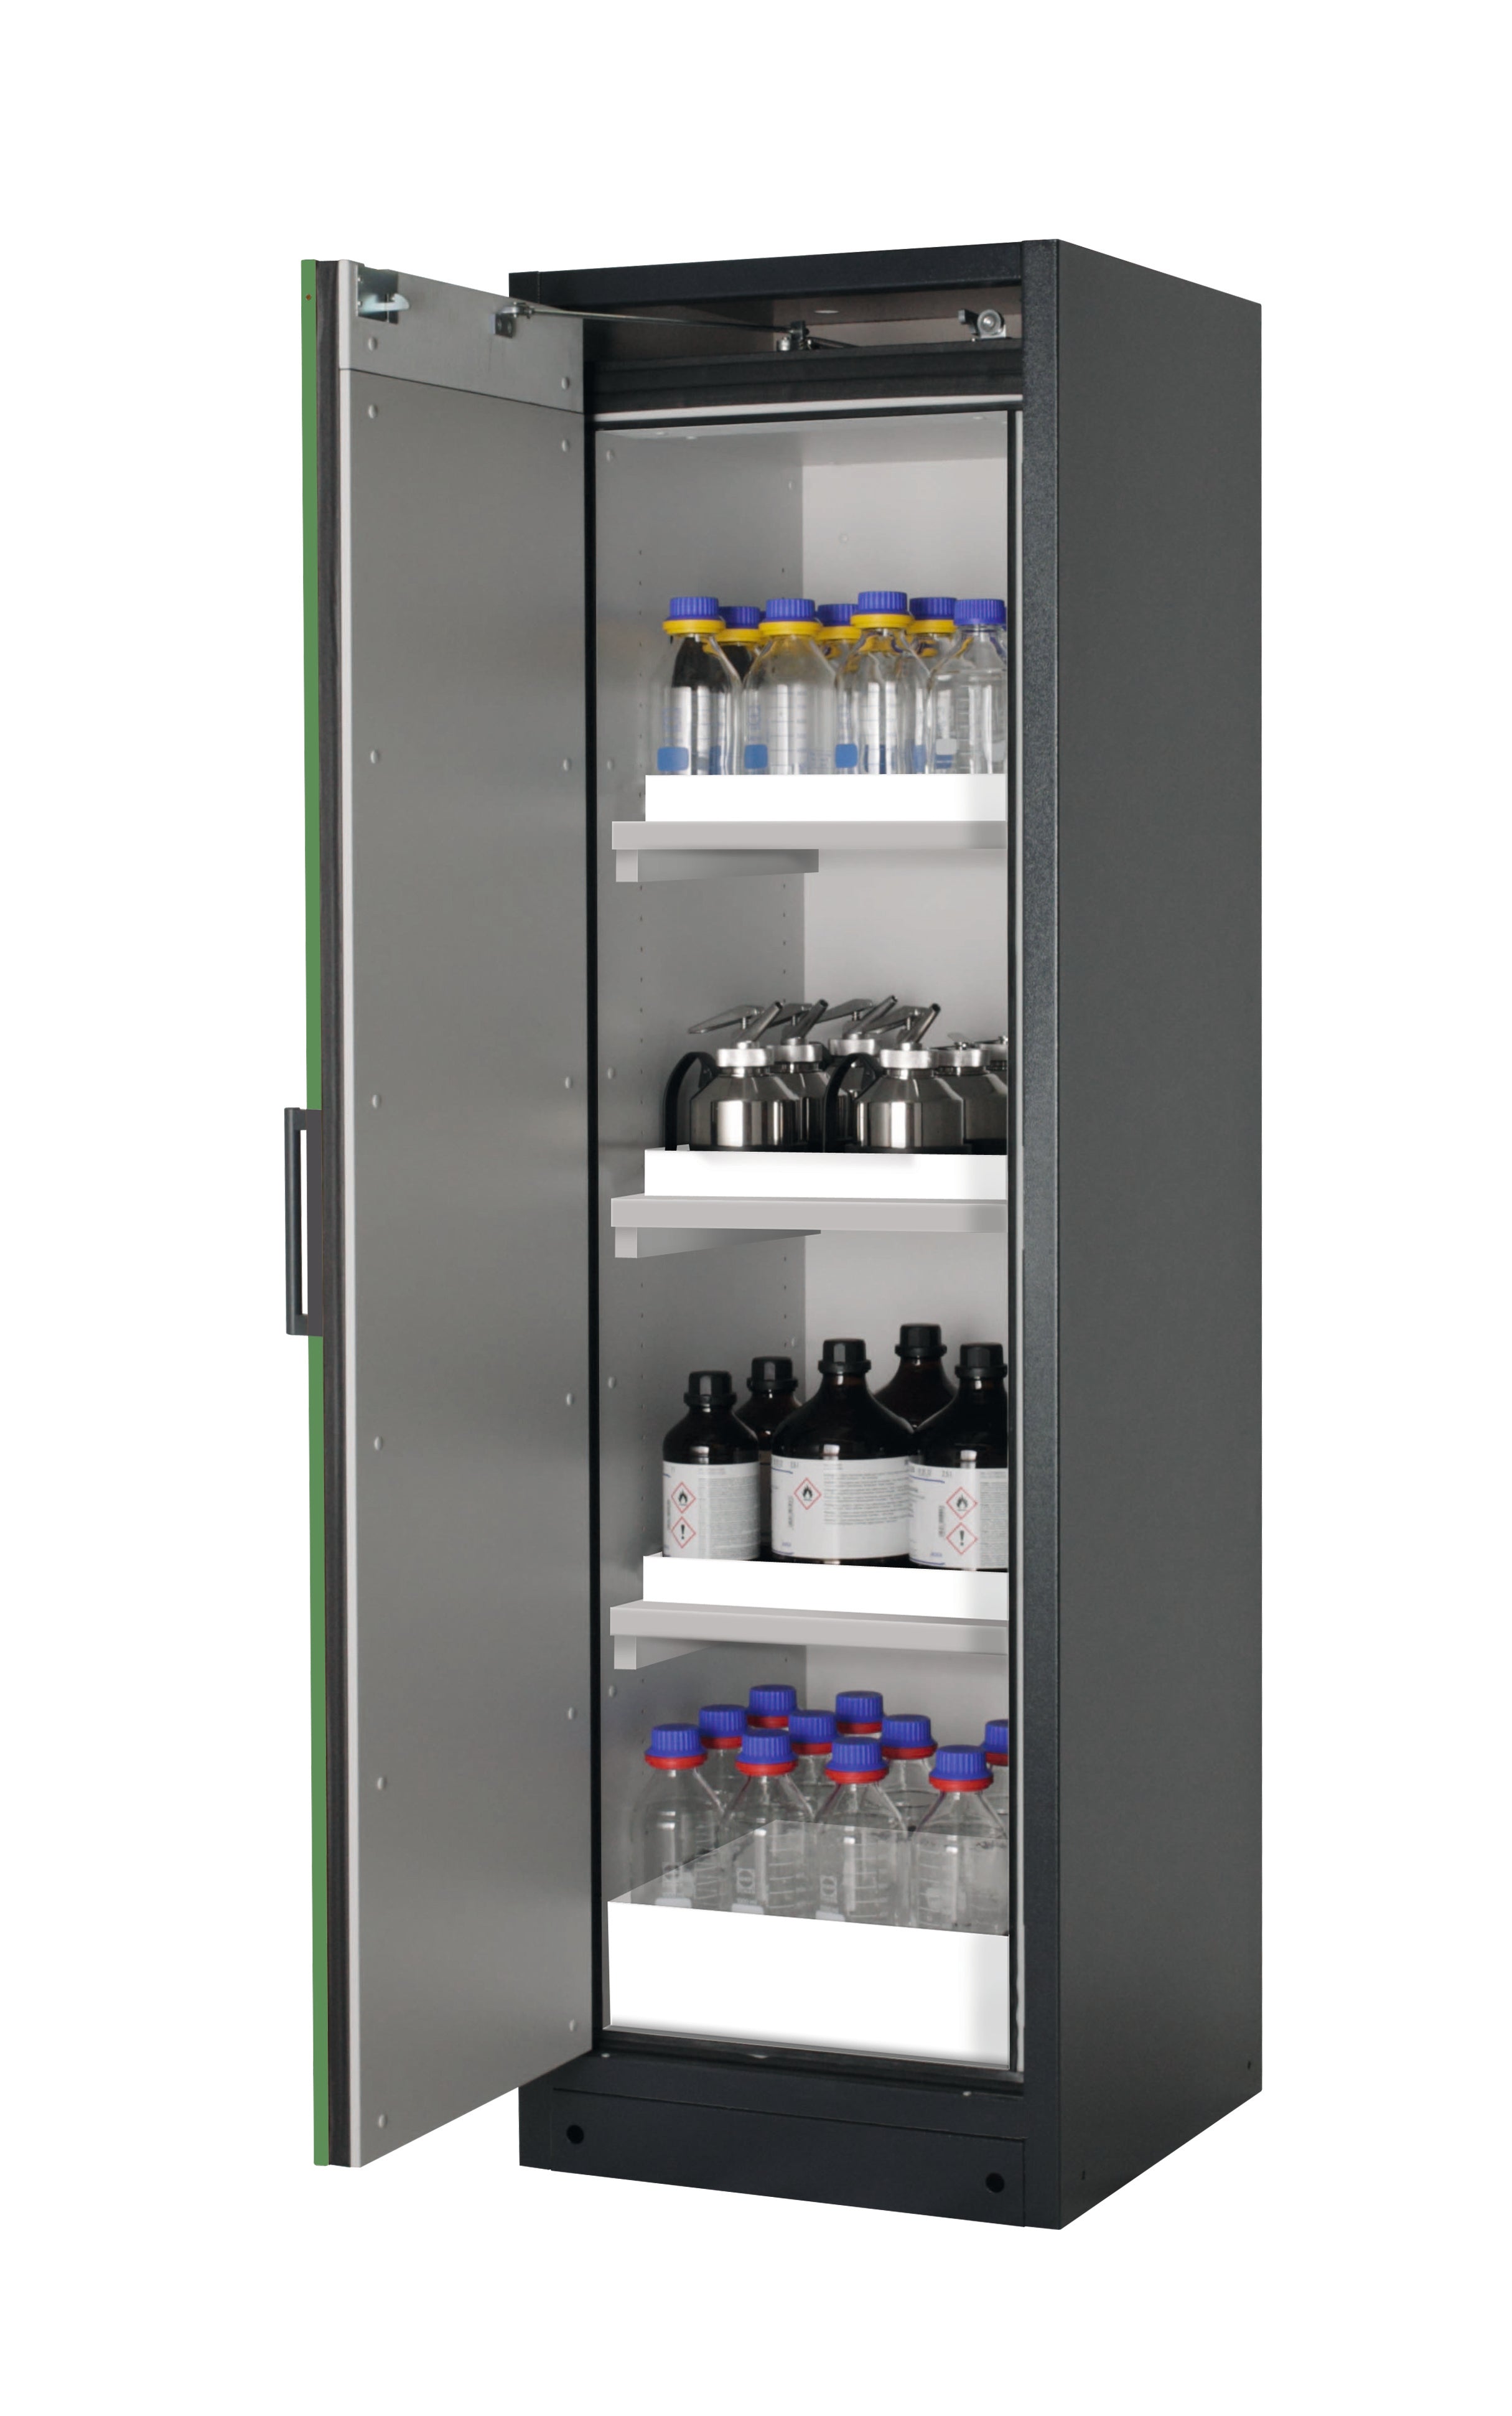 Type 90 safety storage cabinet Q-CLASSIC-90 model Q90.195.060 in reseda green RAL 6011 with 3x tray shelf (standard) (polypropylene),